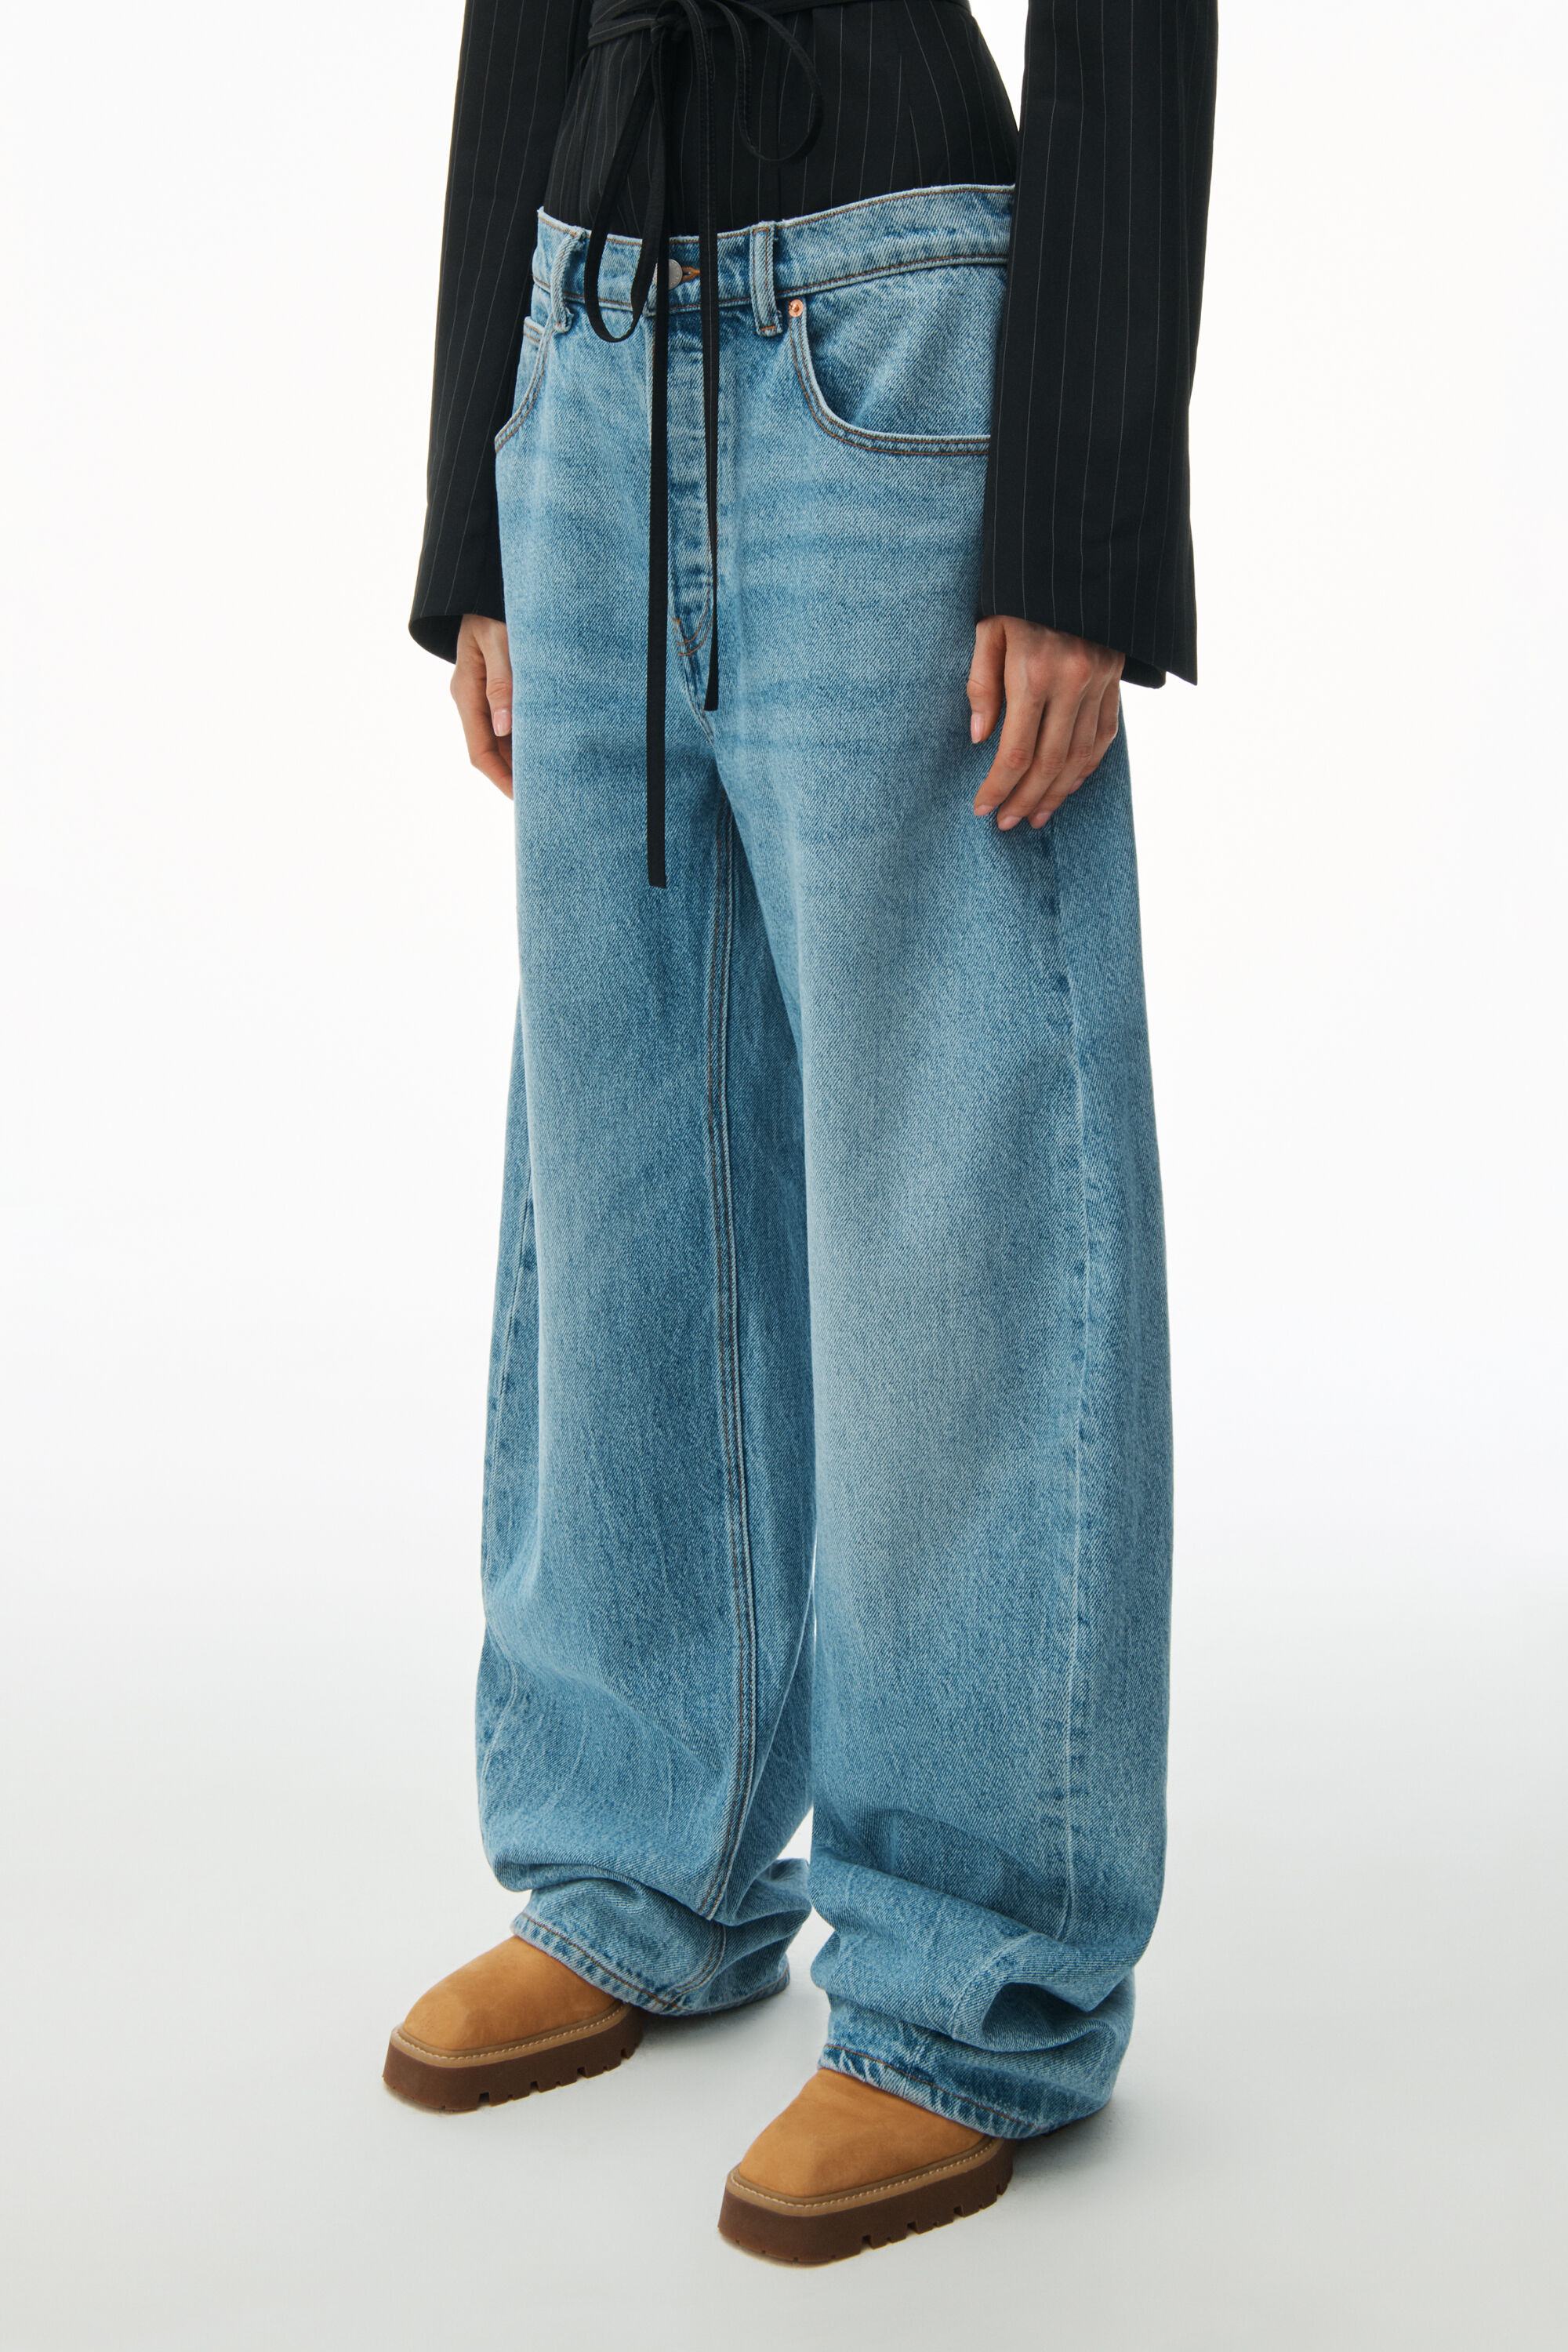 Oversized Low Rise Jean in Recycled Denim in CLASSIC LIGHT 